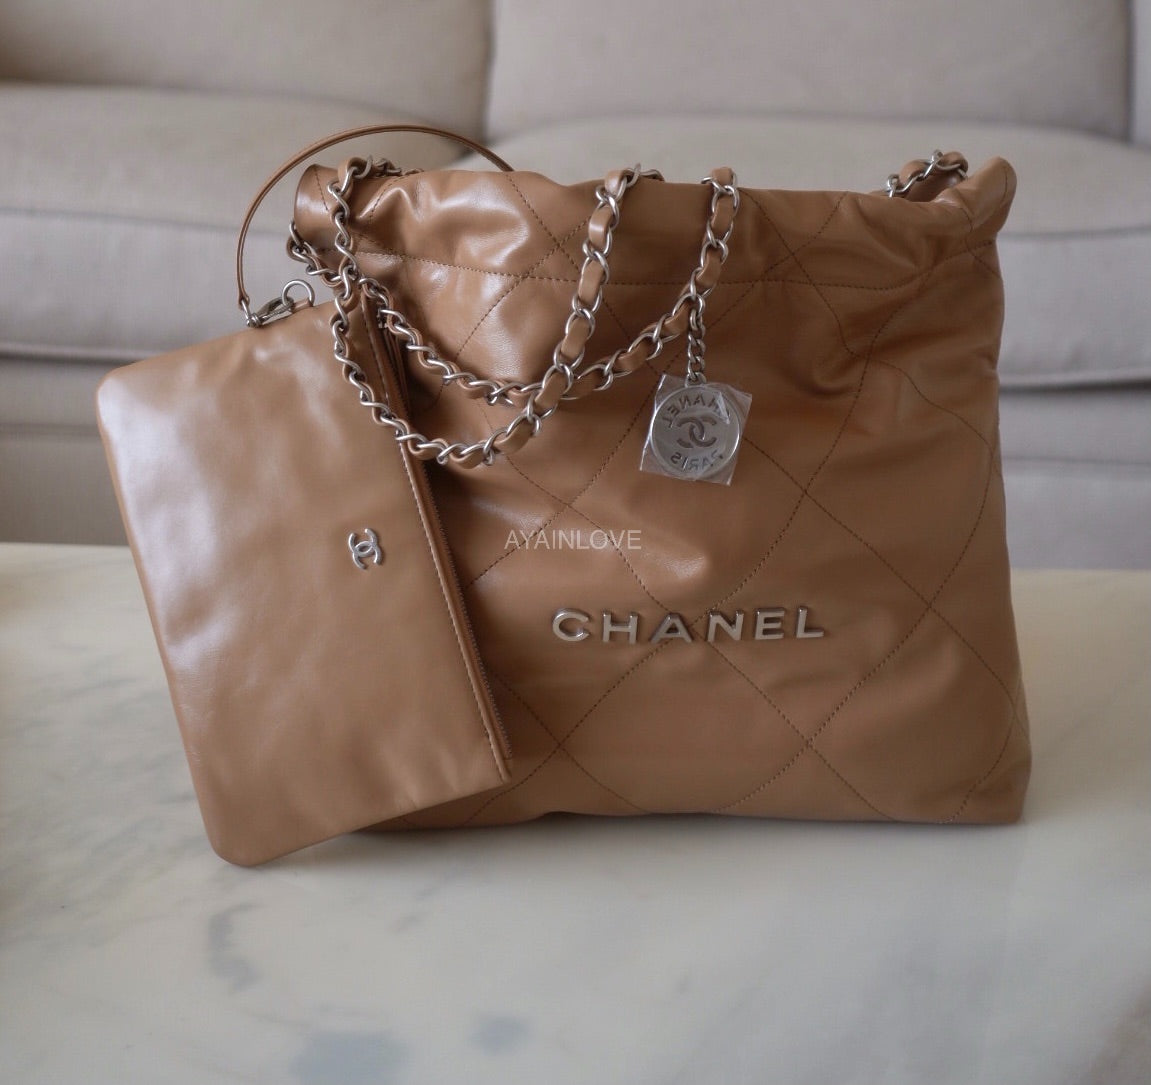 Is the Chanel 22 bag worth the price? • Petite in Paris